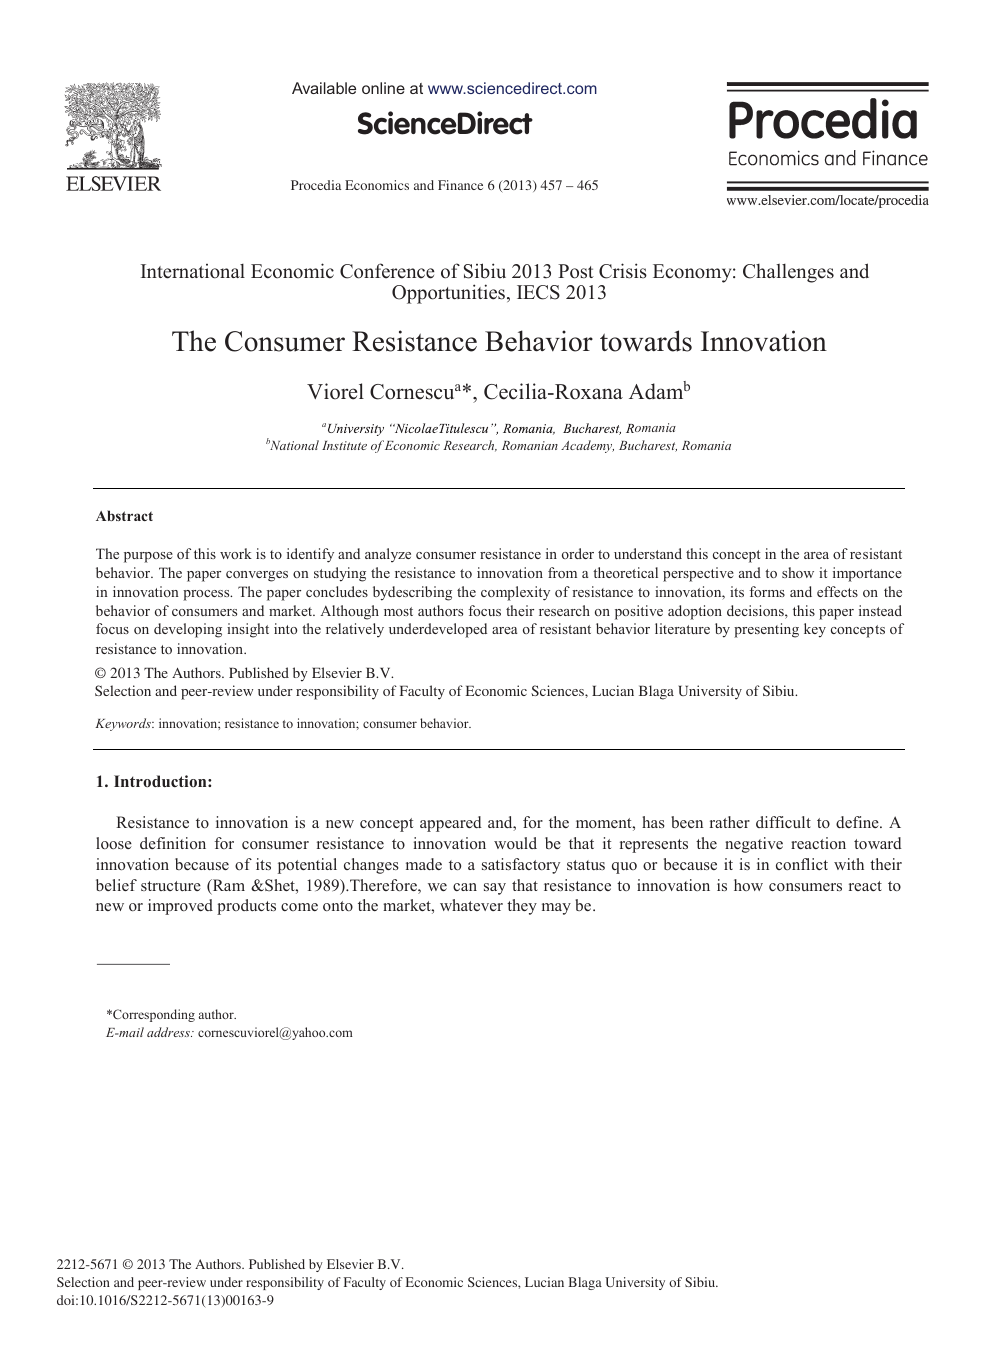 impact of price on consumer buying behavior research paper